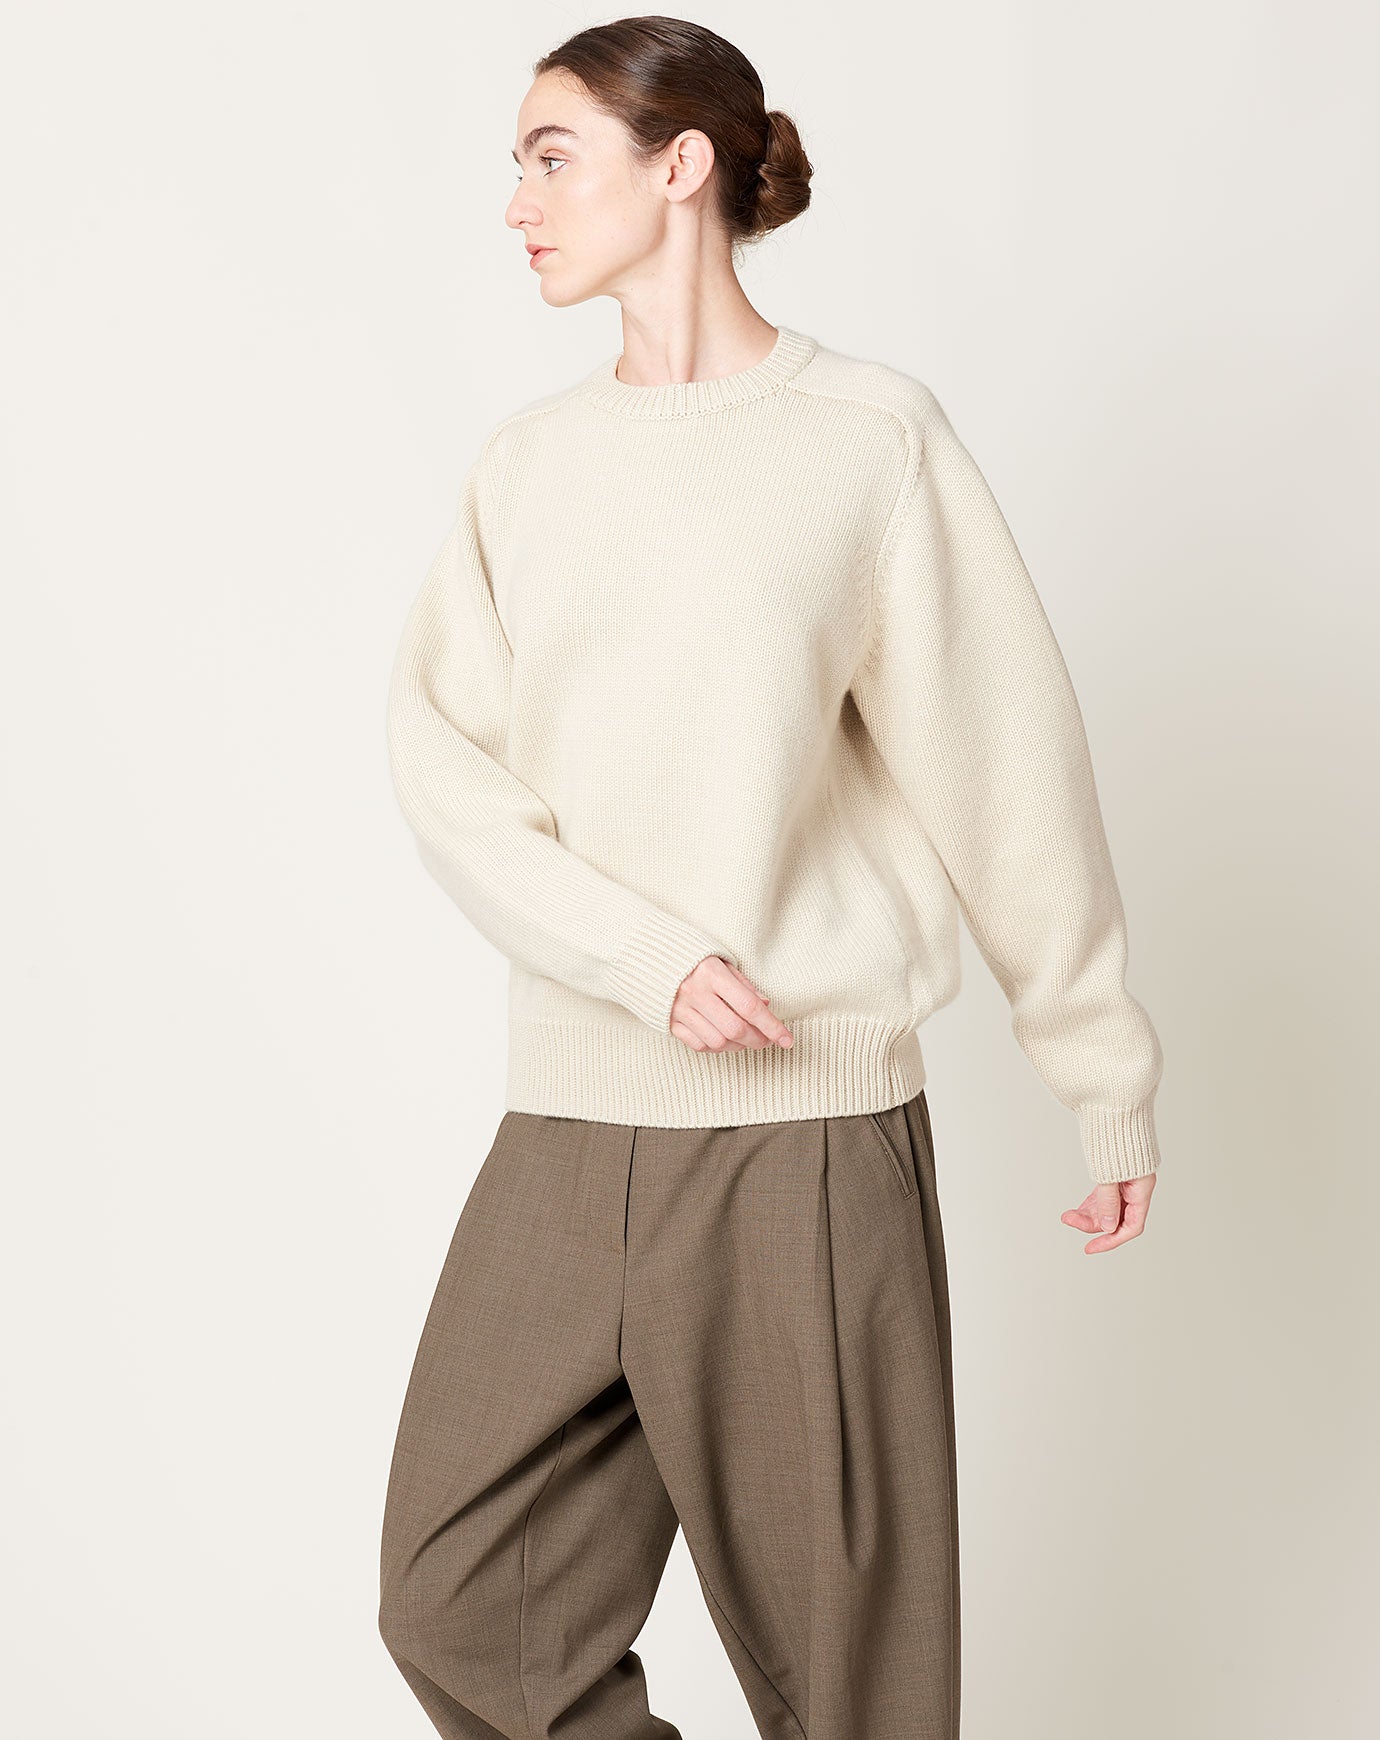 Heavy Weight Cashmere Crew in Ivorry